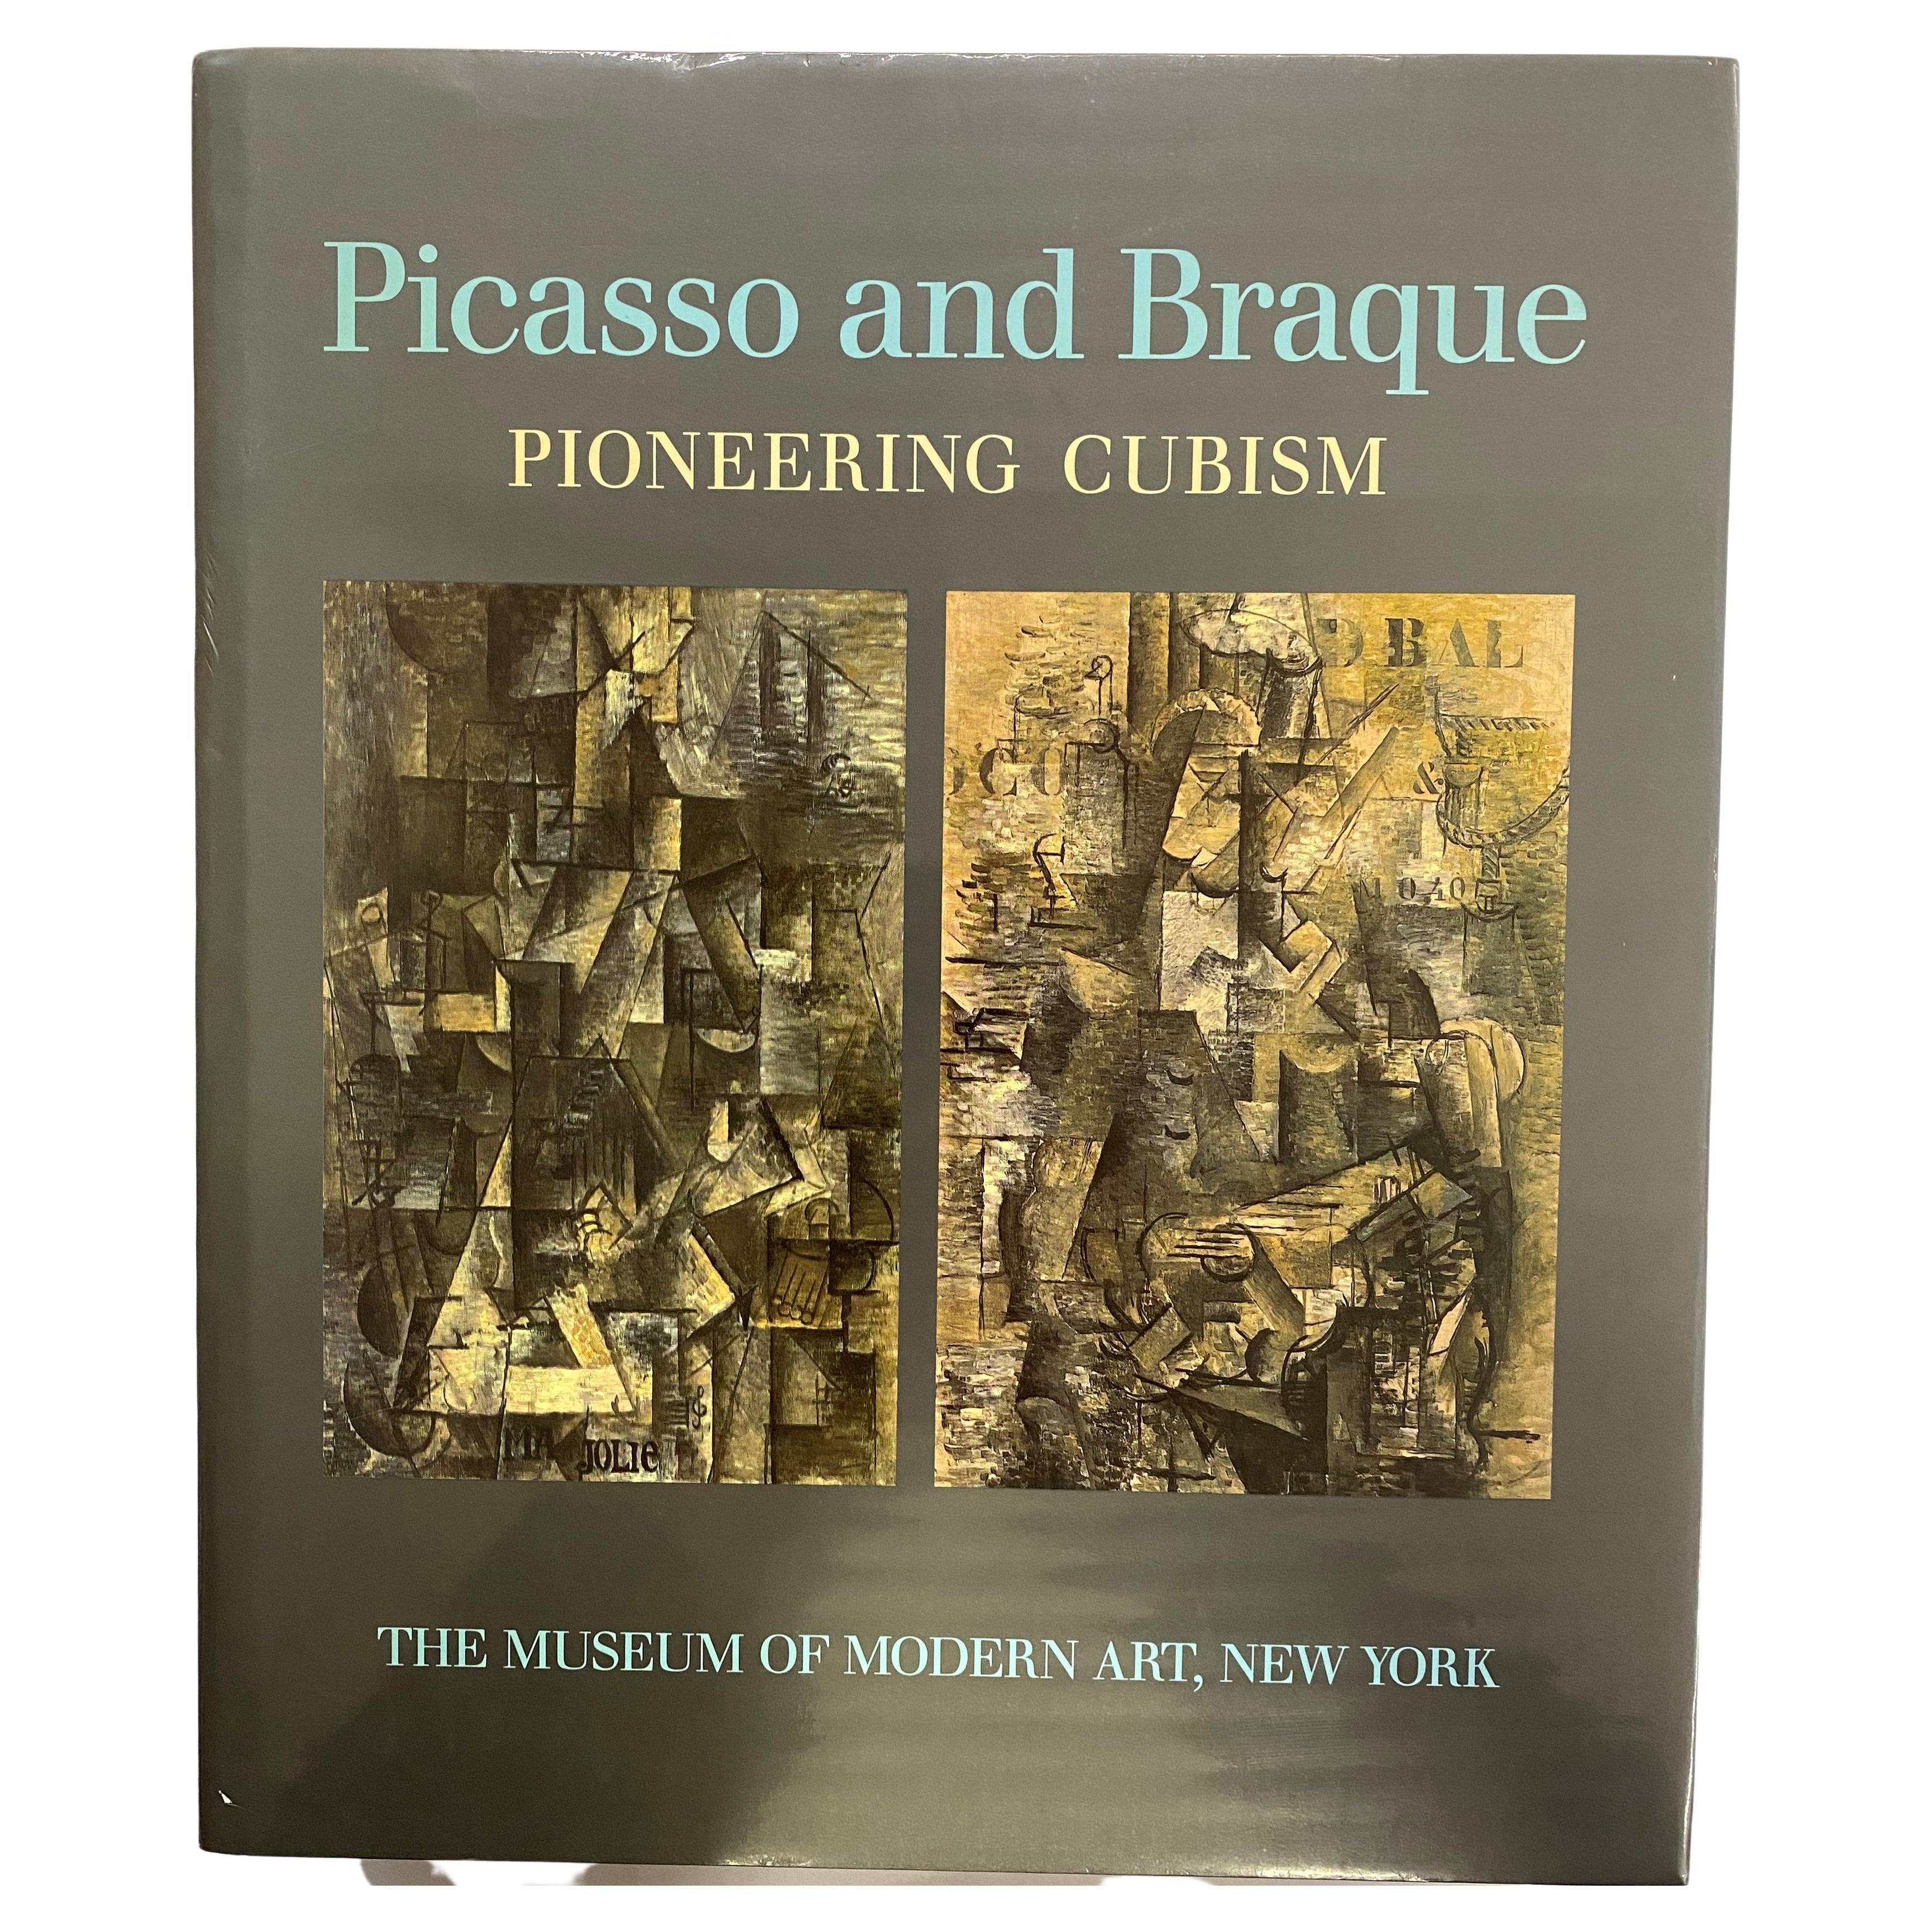 Picasso and Braque, Pioneering Cubism by William Rubin (Book)